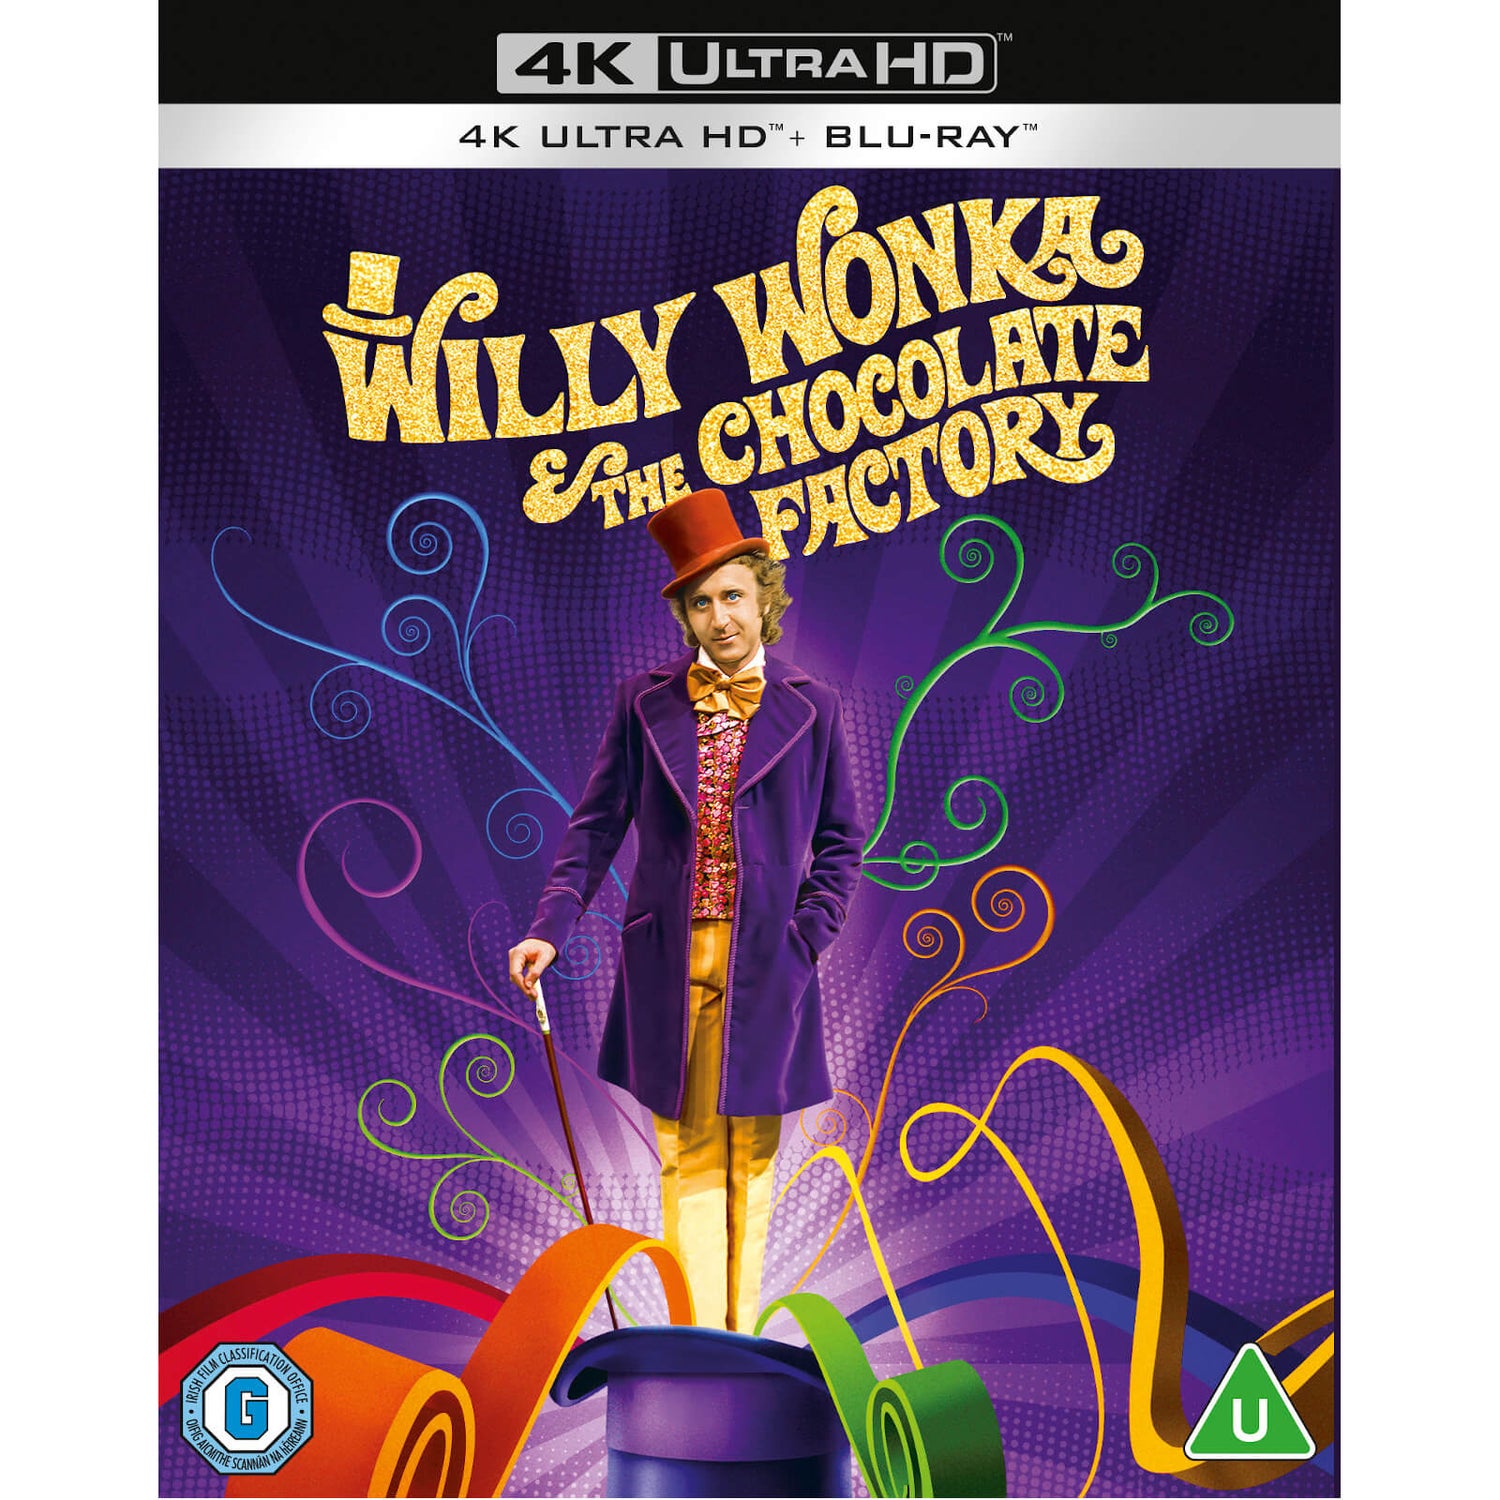 Willy Wonka & the Chocolate Factory - 4K Ultra HD (Includes Blu-ray)